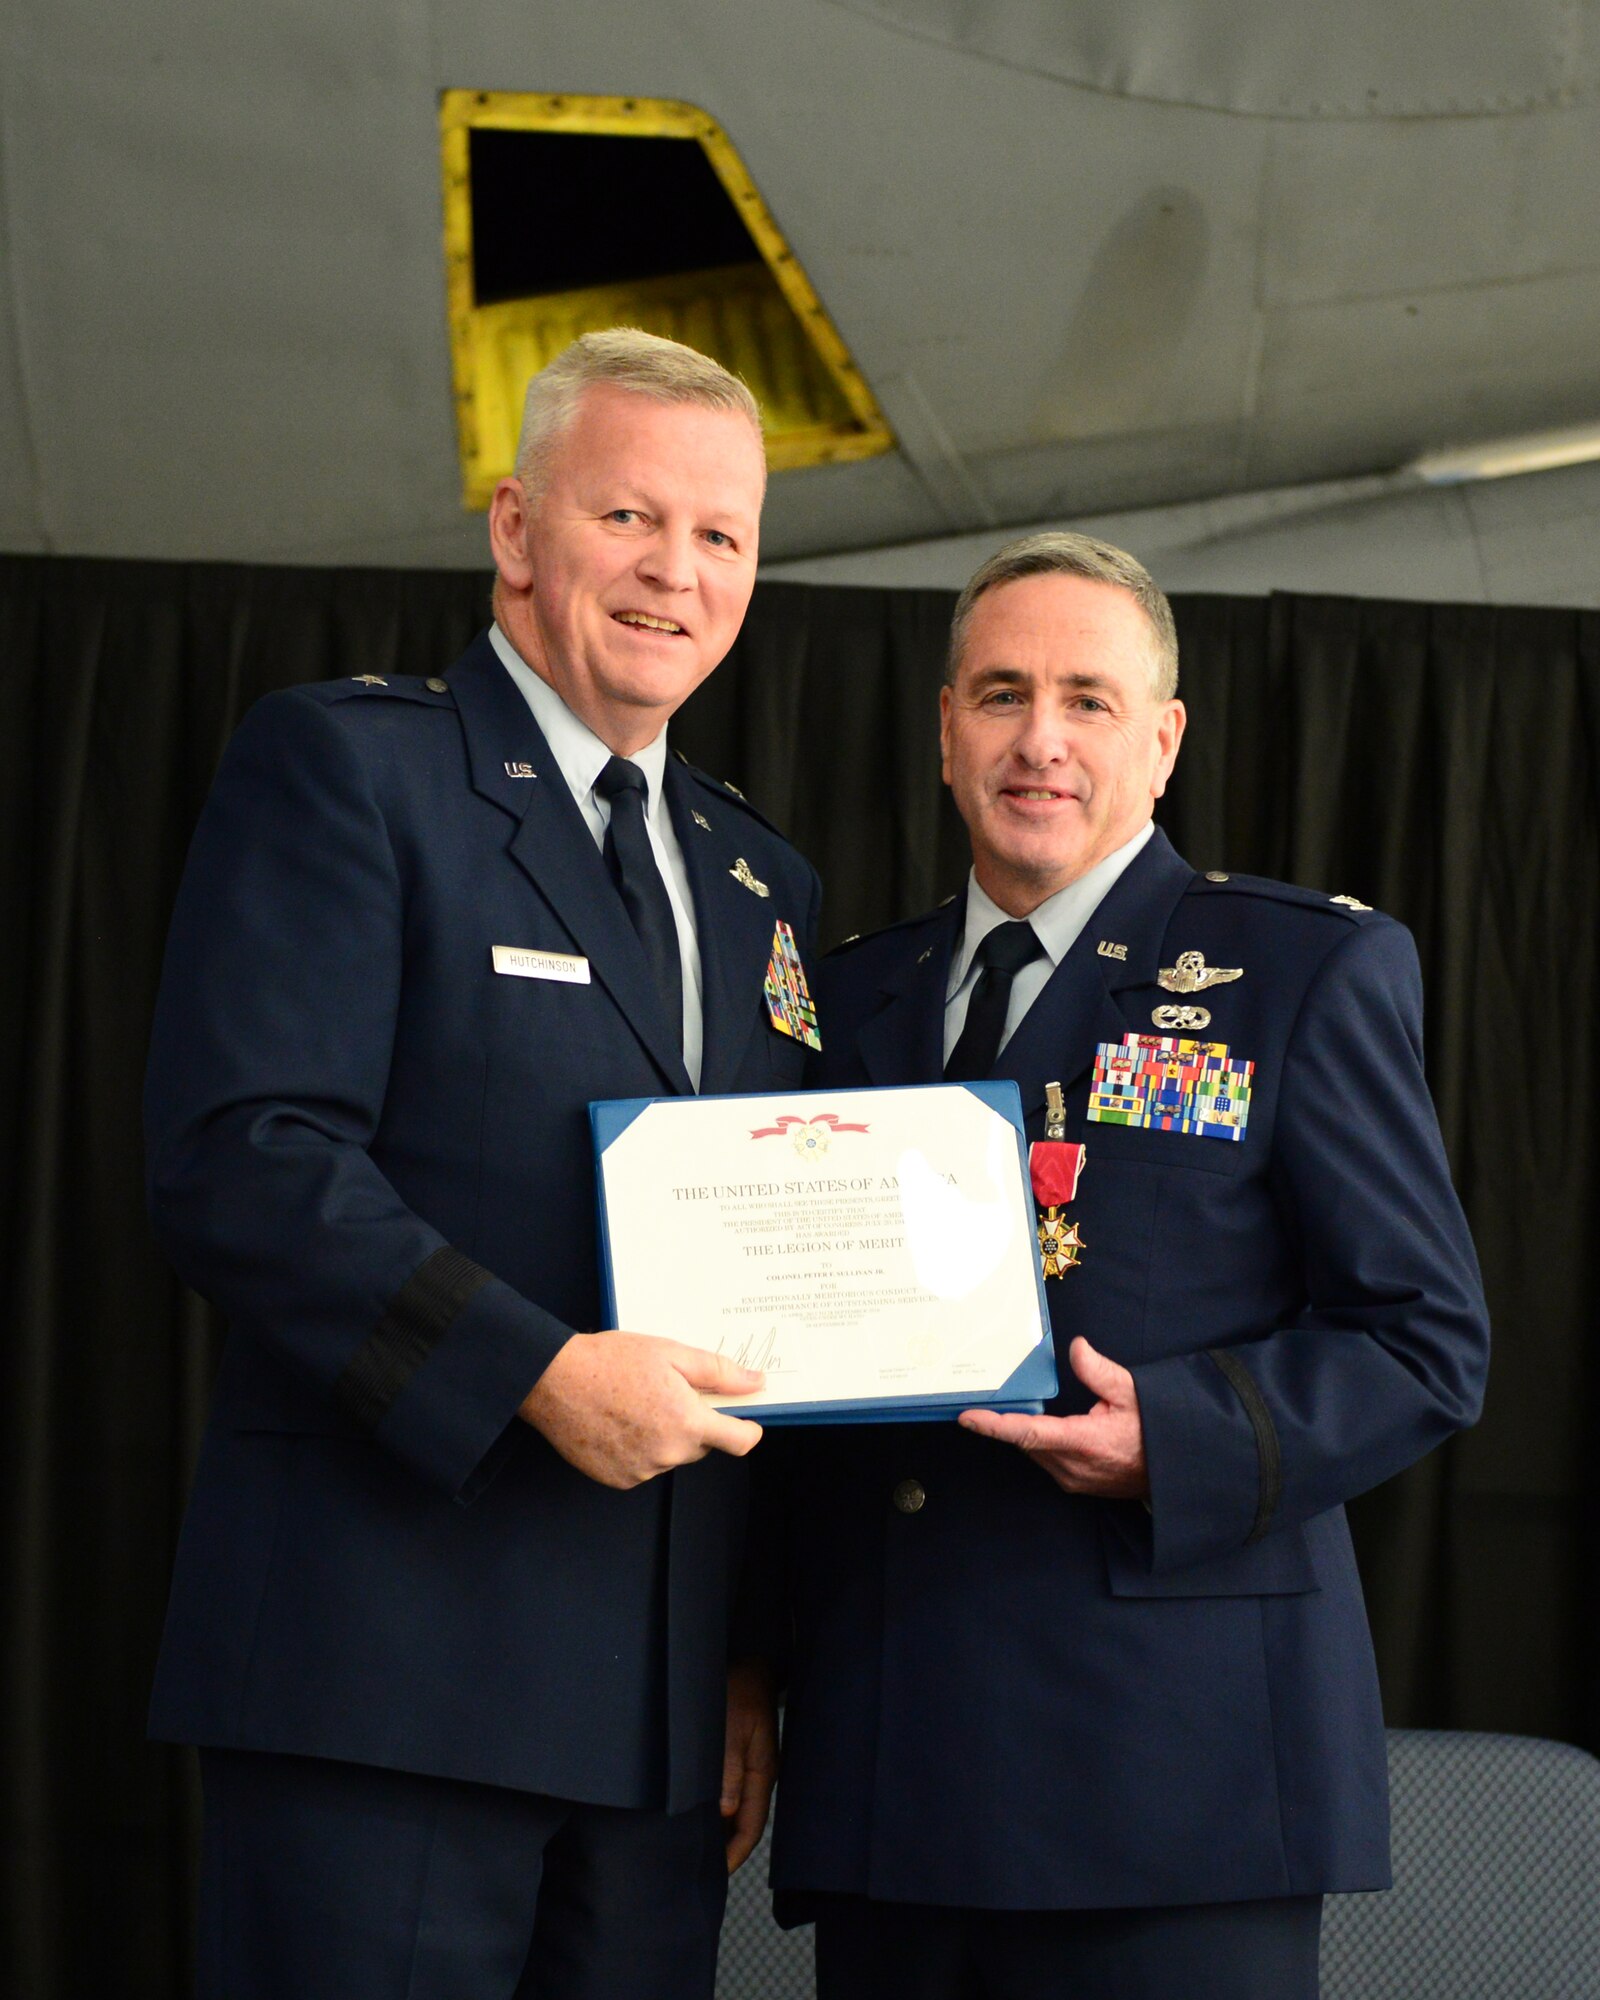 U.S. Air Force Big. Gen. Paul Hutchinson, commander, New Hampshire Air National Guard, presents Col. Peter Sullivan, 157th Air Refueling Wing vice wing commander, with a retirement certificate during Sullivan’s retirement ceremony, Pease Air National Guard Base, N.H., Oct. 15, 2016.  Sullivan retires with 34 years of service.  (U.S. Air National Guard photo by Senior Airman Ashlyn J. Correia)